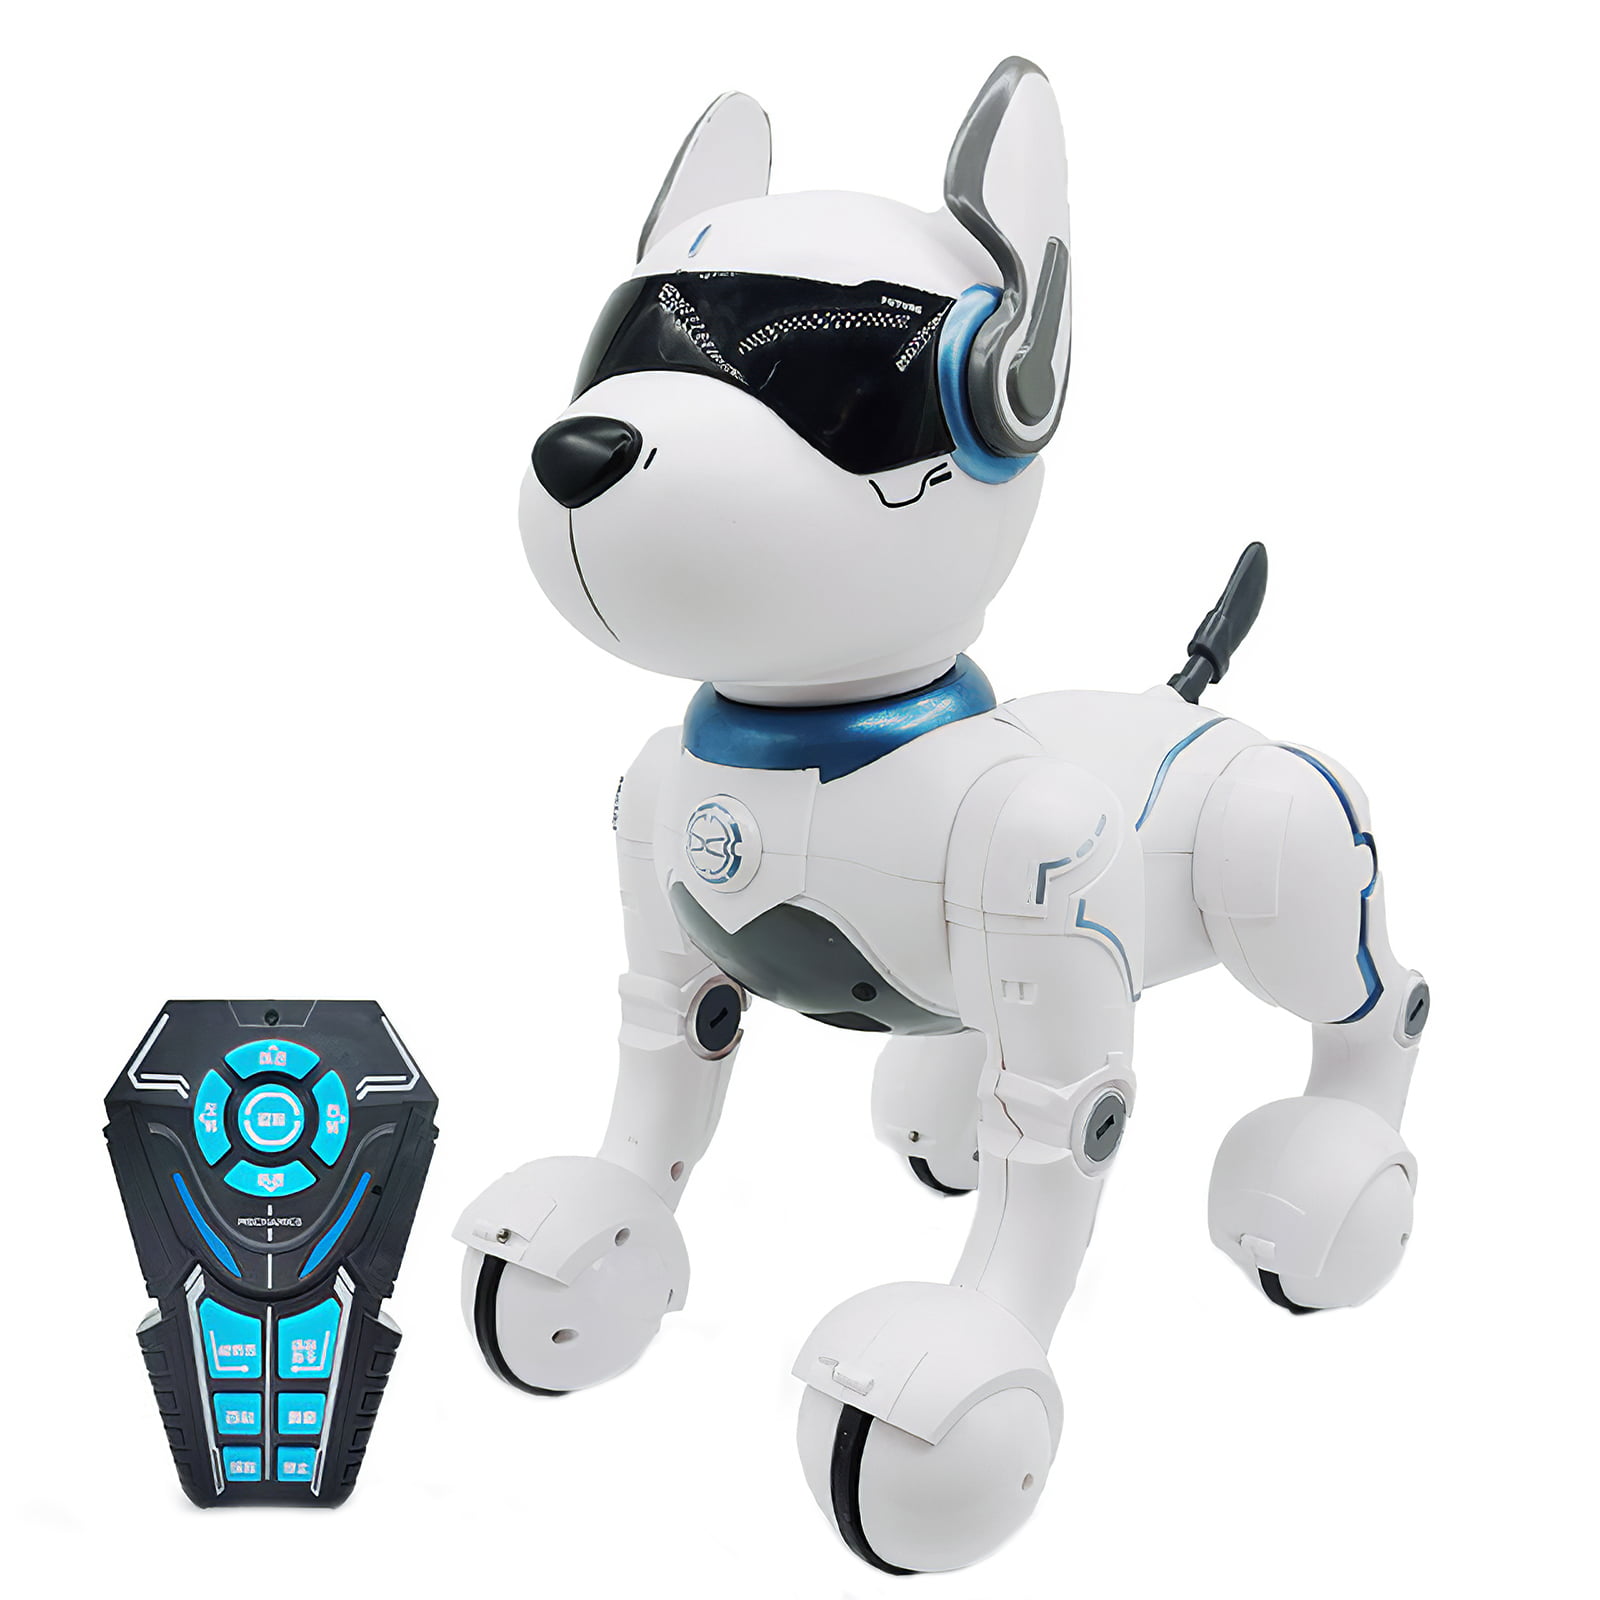 Kid's Robot Carry Case Fits Boxer Interactive A.I Robot Toy and Accesories 